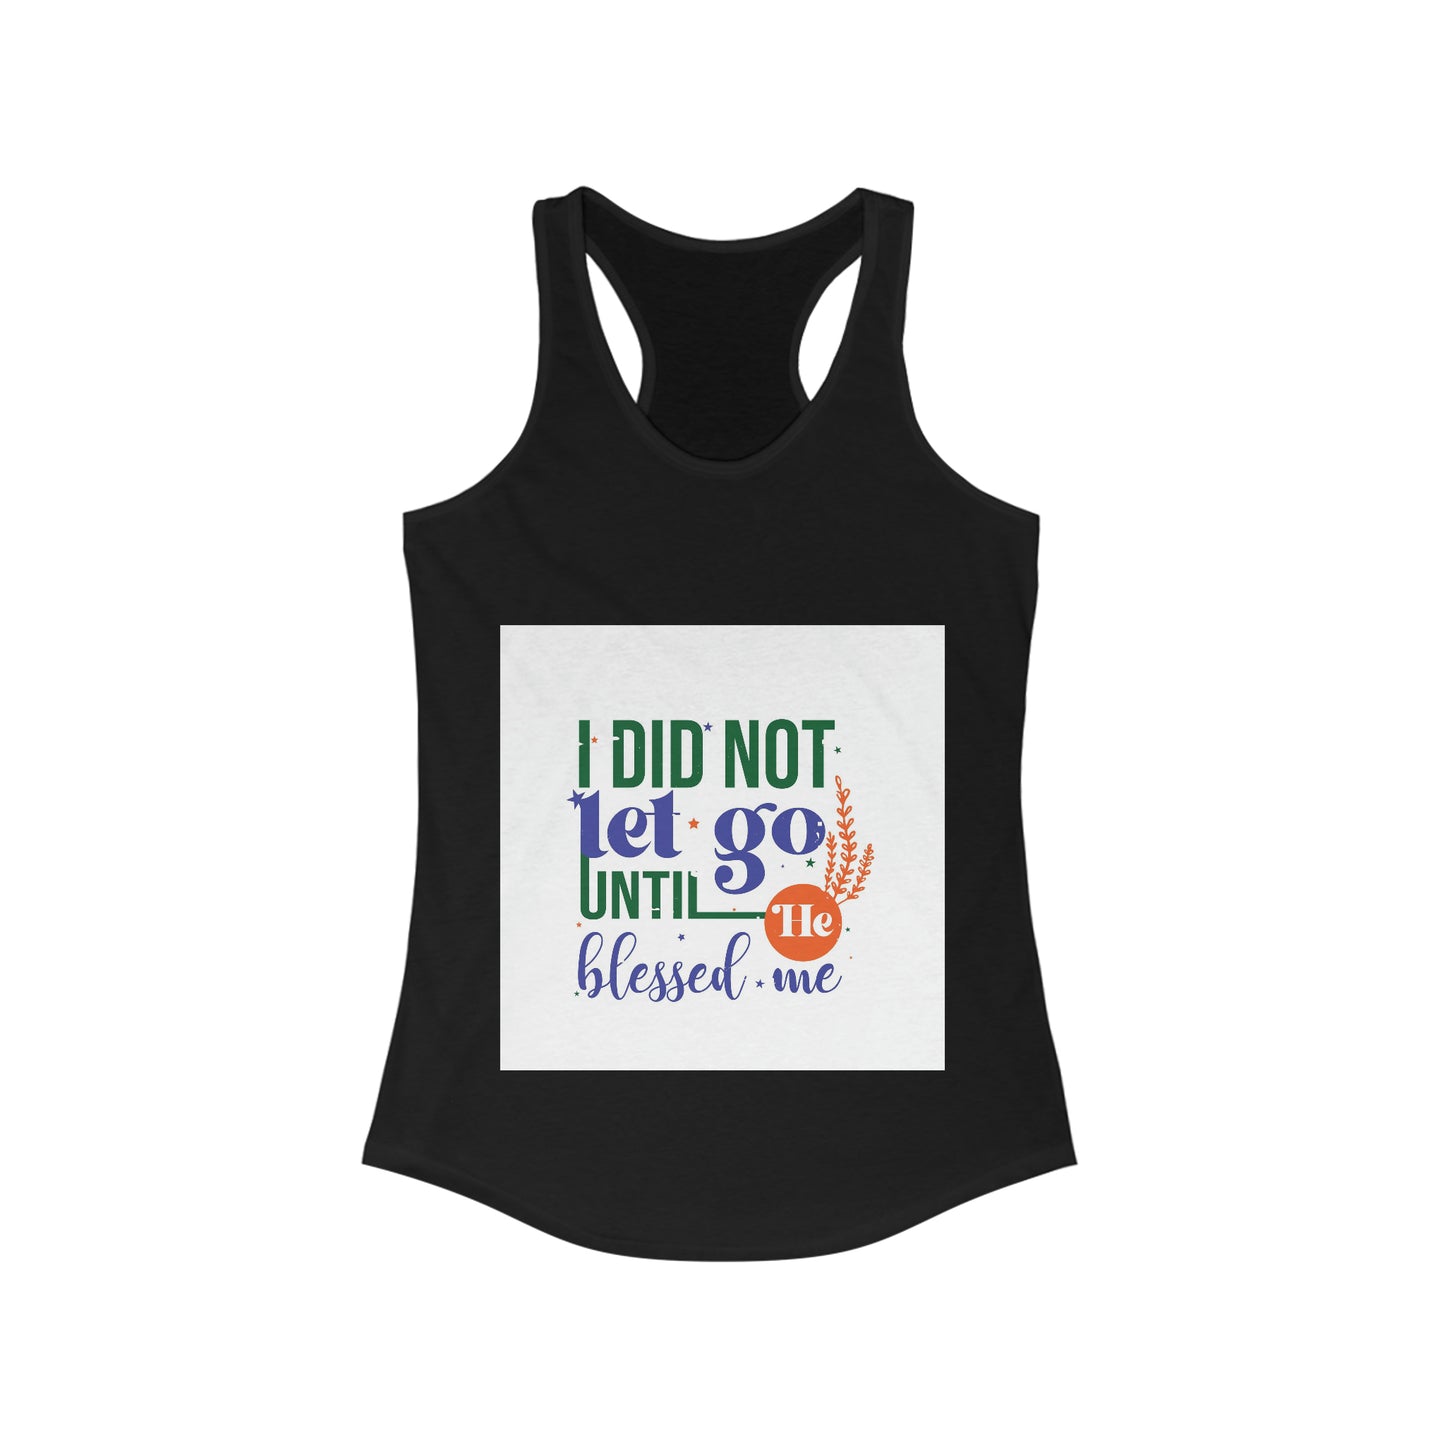 I Did Not Let Go Until He Blessed Me slim fit tank-top